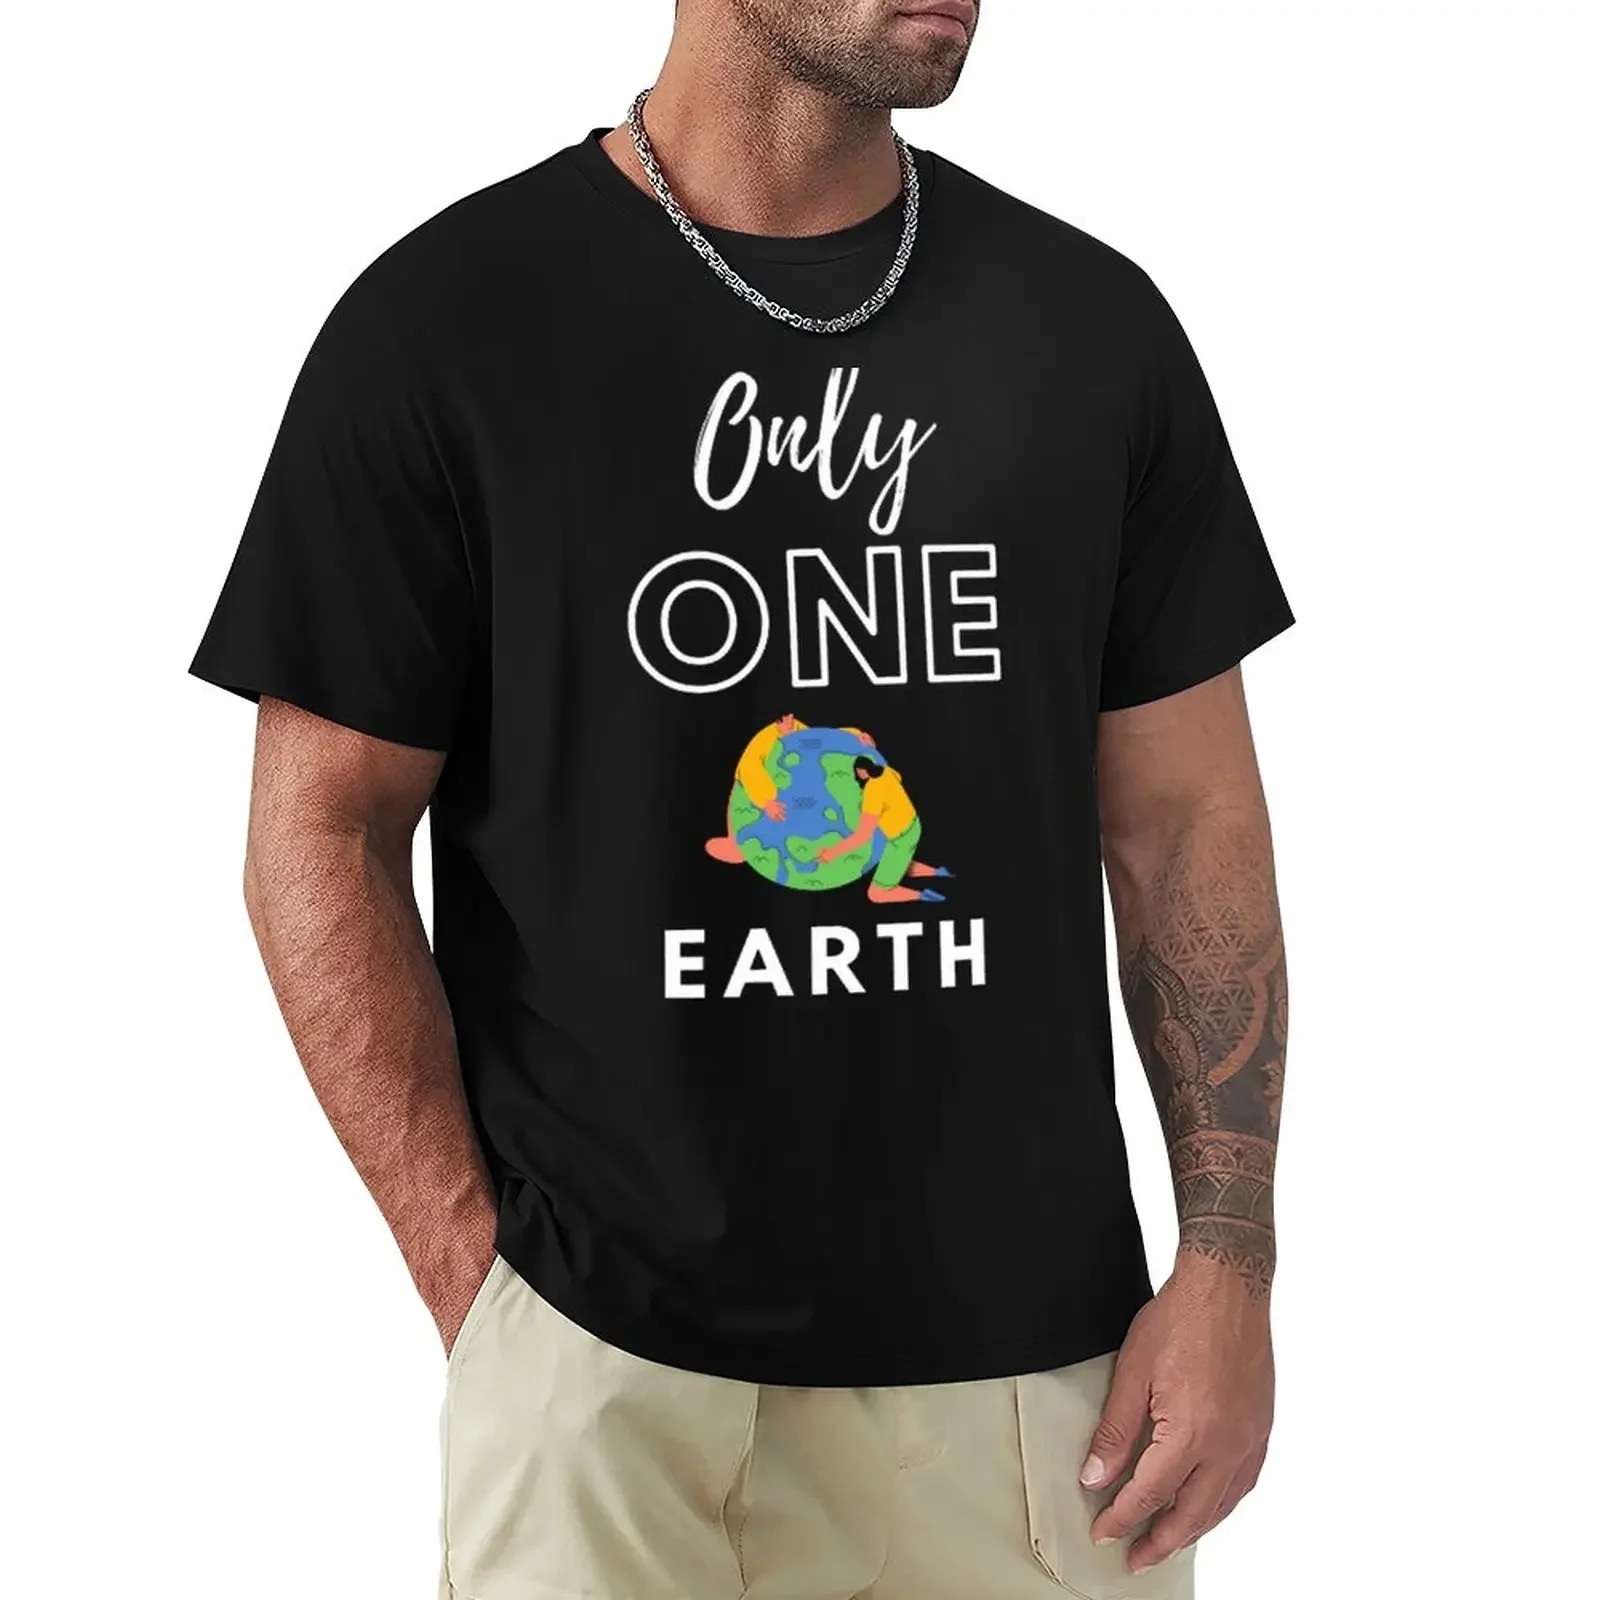 

There is Only one earth - climate change activists T-Shirt vintage plain blacks blanks mens graphic t-shirts big and tall